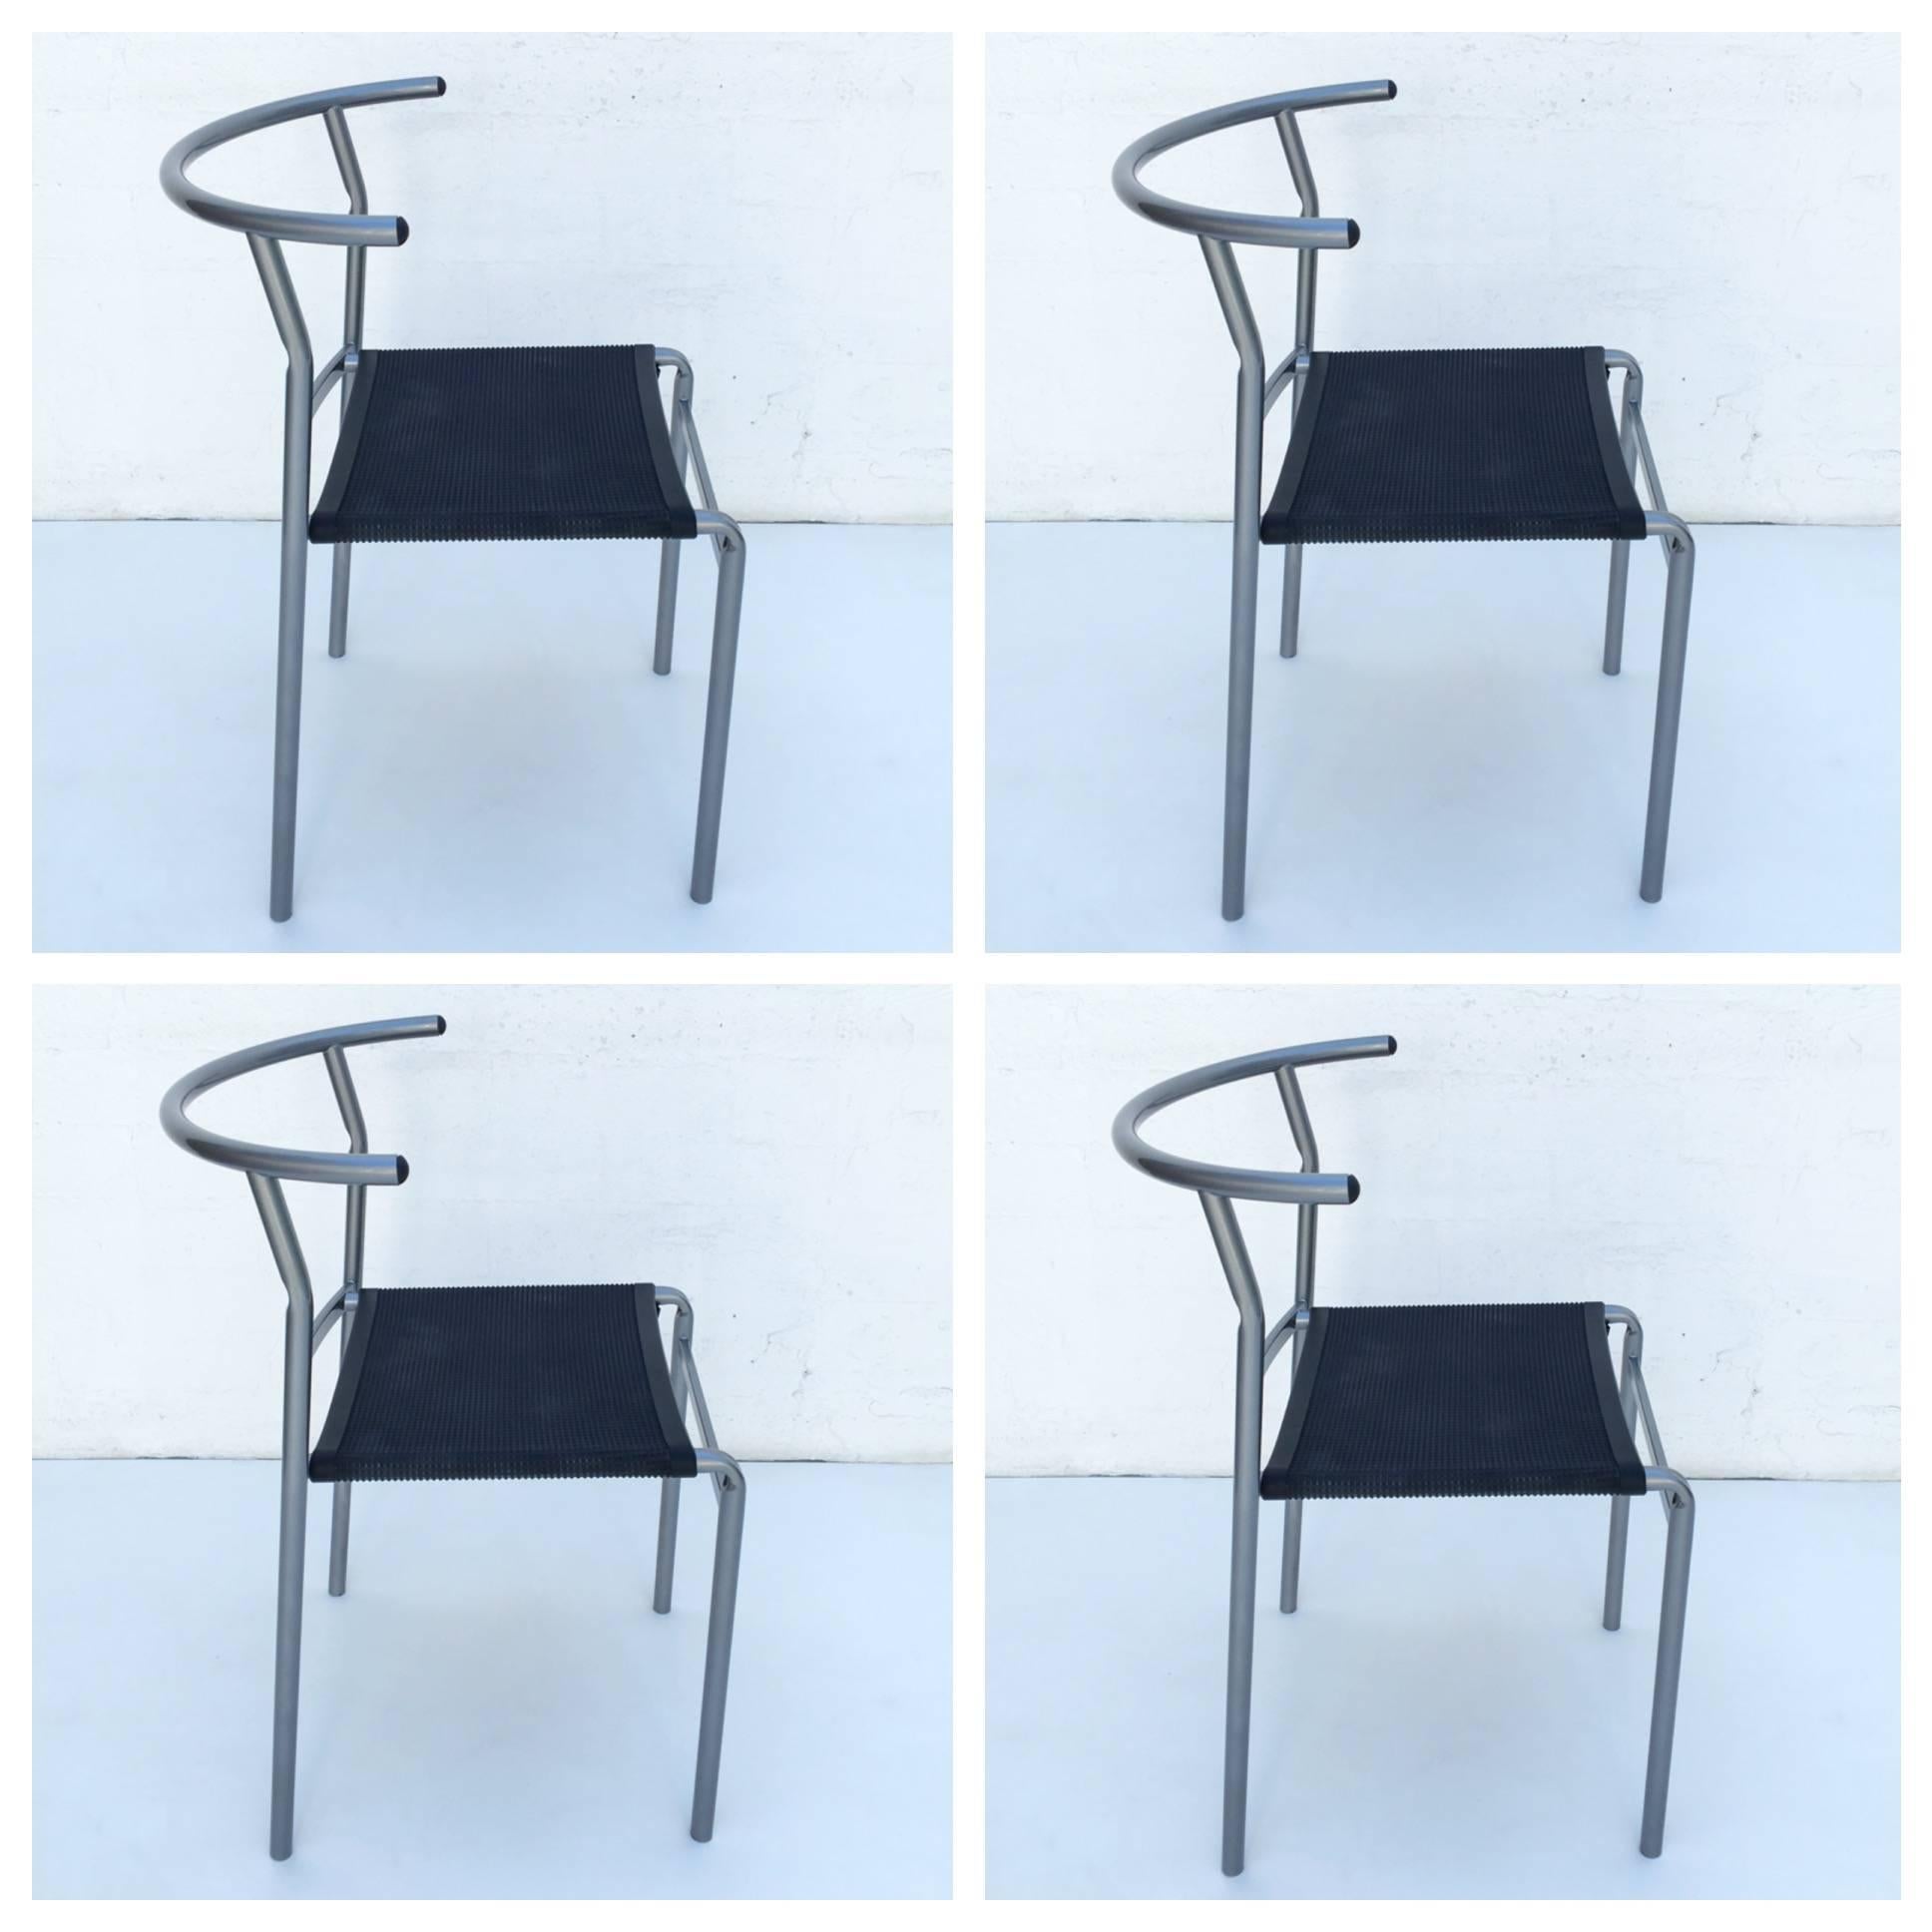 A set of four café chairs designed by Philippe Starck in 1983 for Costa café. This were made by Cerruti Baleri, Italy in 1984.
The seat is made out of thick rubber and the frame is steel pipe powder coated silver gray.
Newly powder coated.